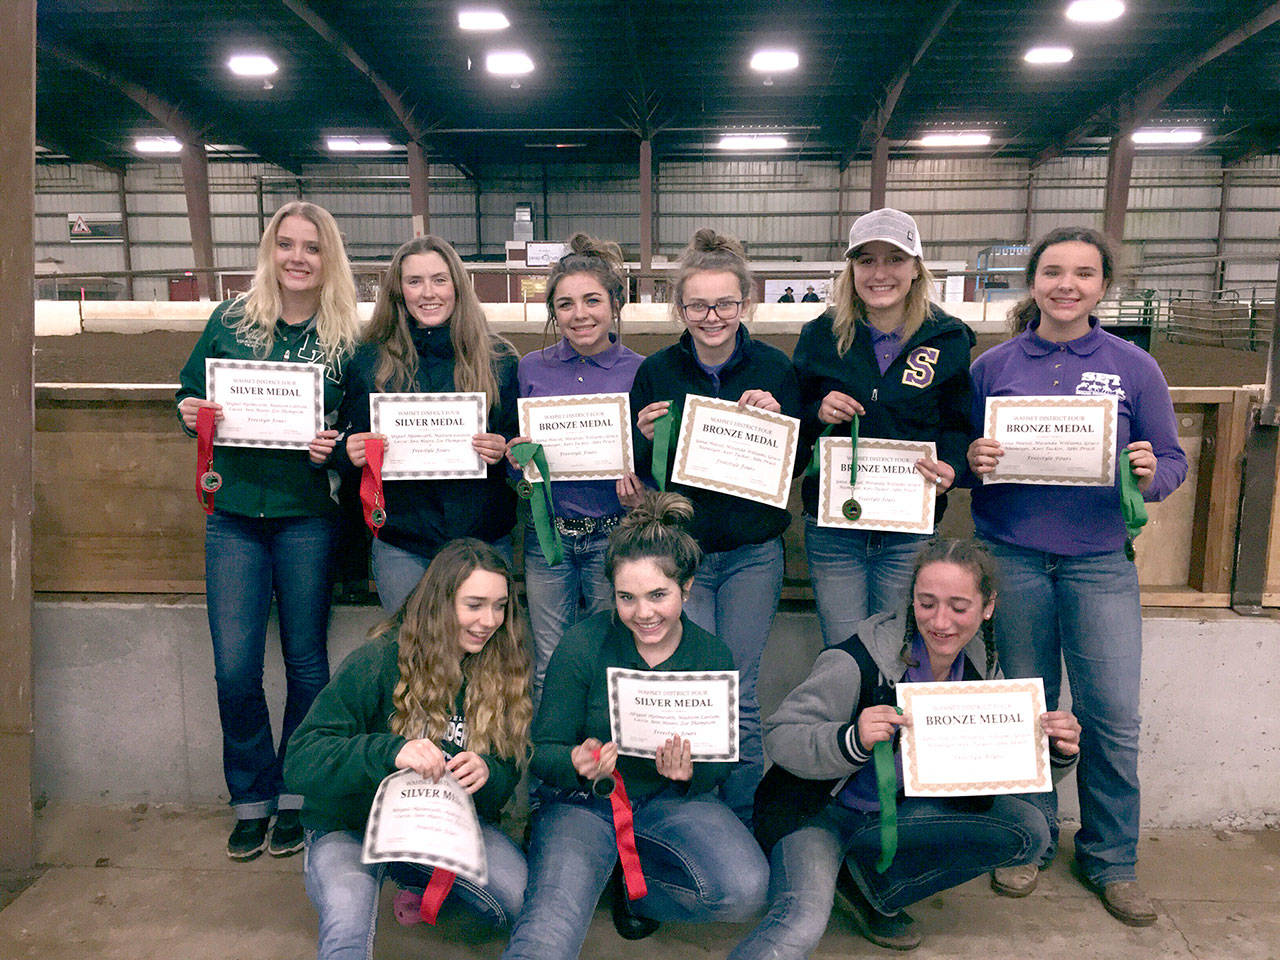 Port Angeles and Sequim’s high school equestrian Freestyle-fours drill teams each earned medals. From Port Angeles, Cassi Ann Moore, Abby Hjelmeseth, Madison Carlson and Zoe Thompson won gold. From Sequim, Keri Tucker, Miranda Williams, Grace Niemeyer, Yana Hoesel and Abbi Priest won the bronze. These medals contributed to overall points during the three district-qualifying meets of the season, which means both teams will be competing at the upcoming state finals. (Katie Newton)